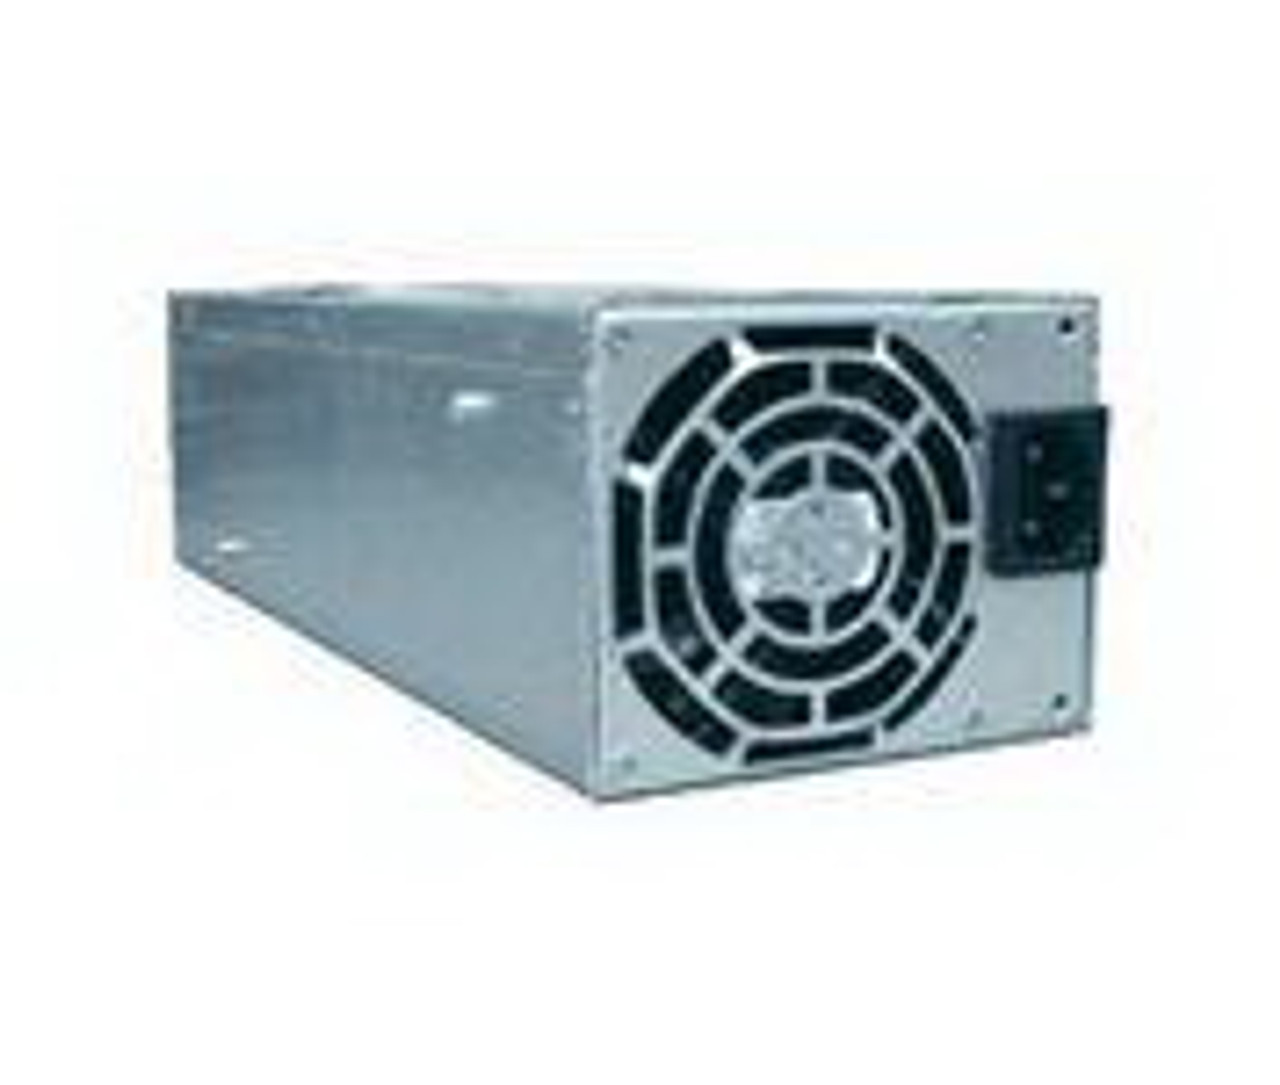 PWS-0027 SuperMicro 400Watts Power Supply for 2U Rackmount Server Chassis